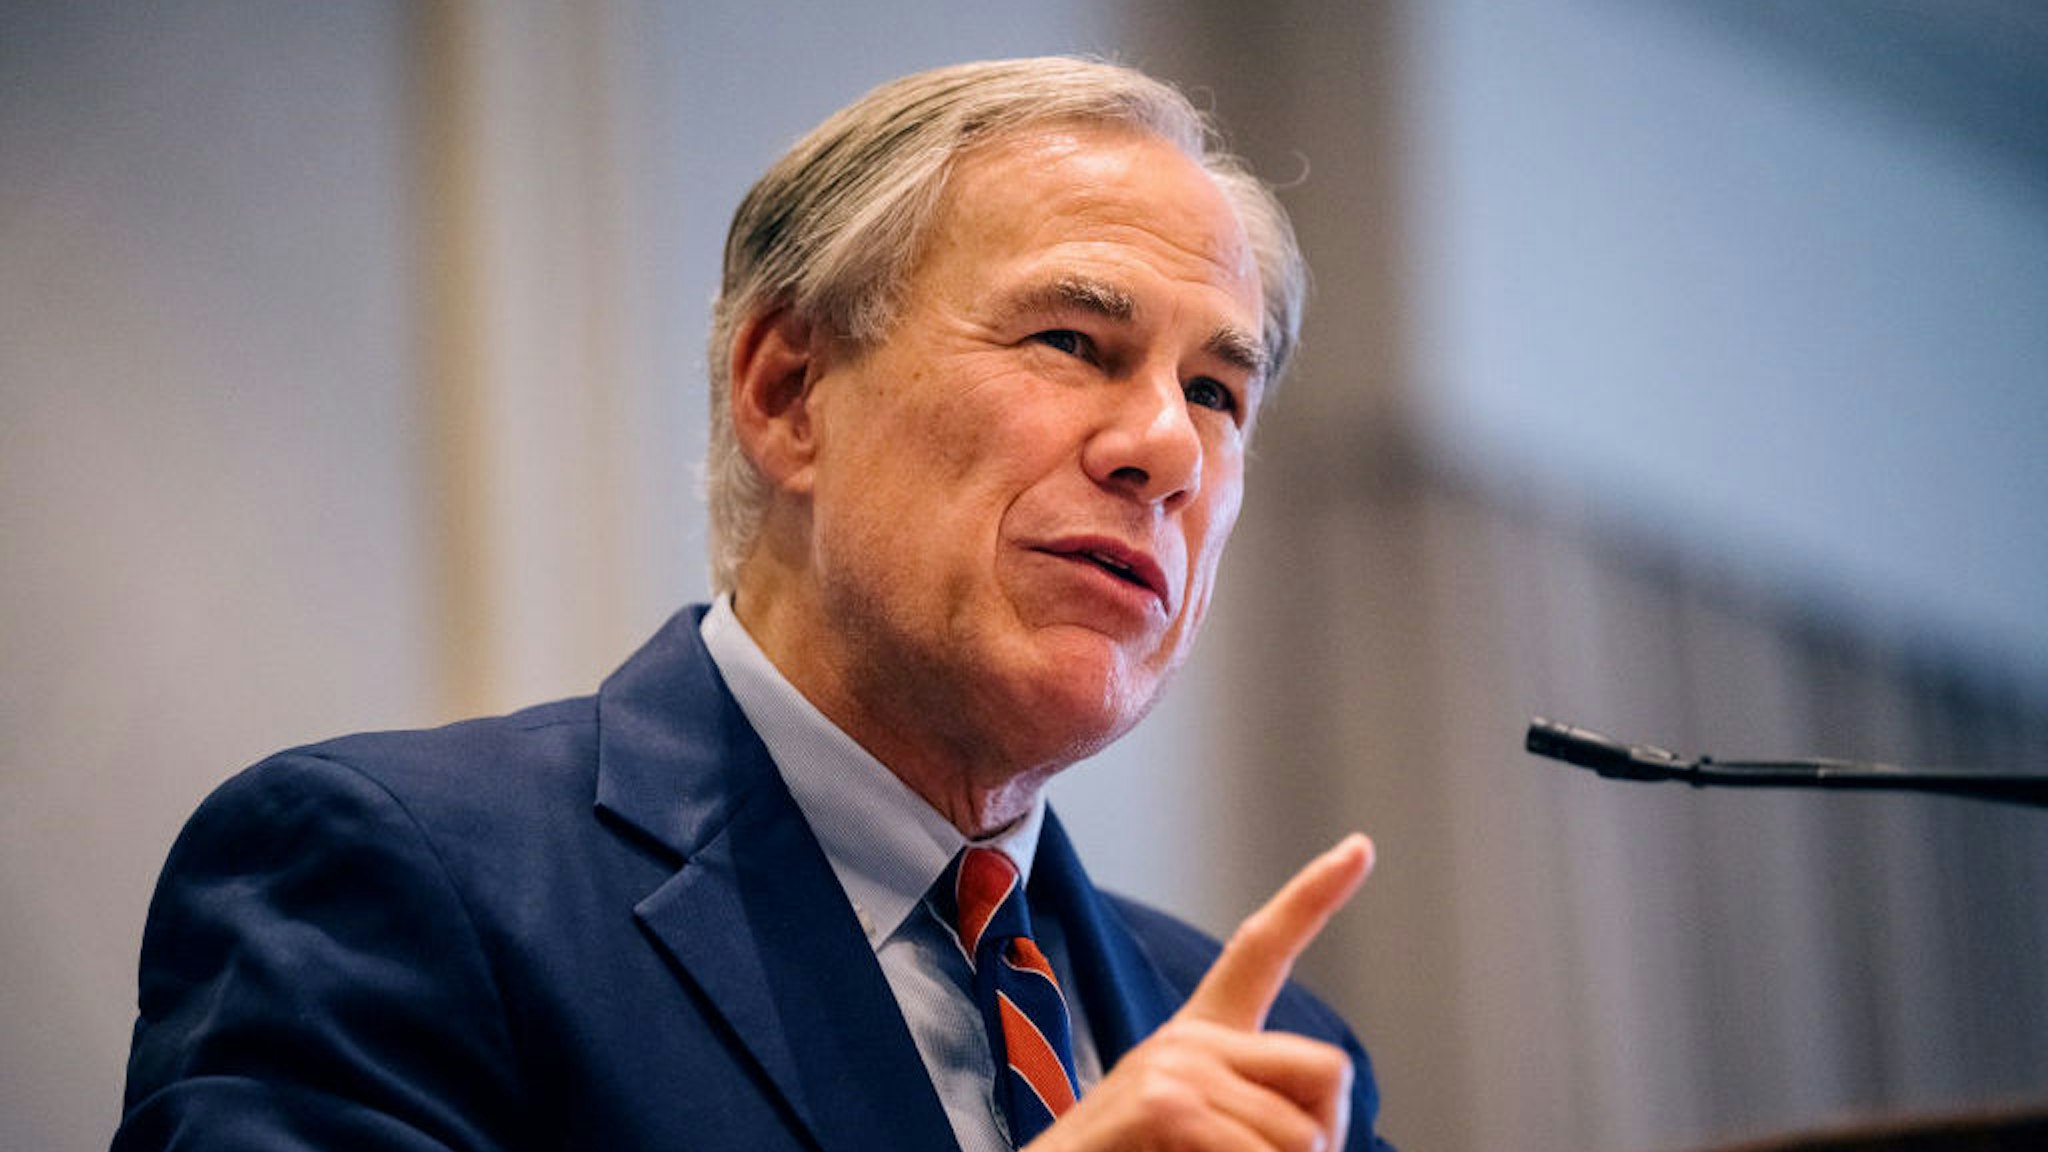 HOUSTON, TEXAS - OCTOBER 27: Texas Governor Greg Abbott speaks during the Houston Region Business Coalition's monthly meeting on October 27, 2021 in Houston, Texas. Abbott spoke on Texas' economic achievements and gave an update on the state's business environment. (Photo by Brandon Bell/Getty Images)